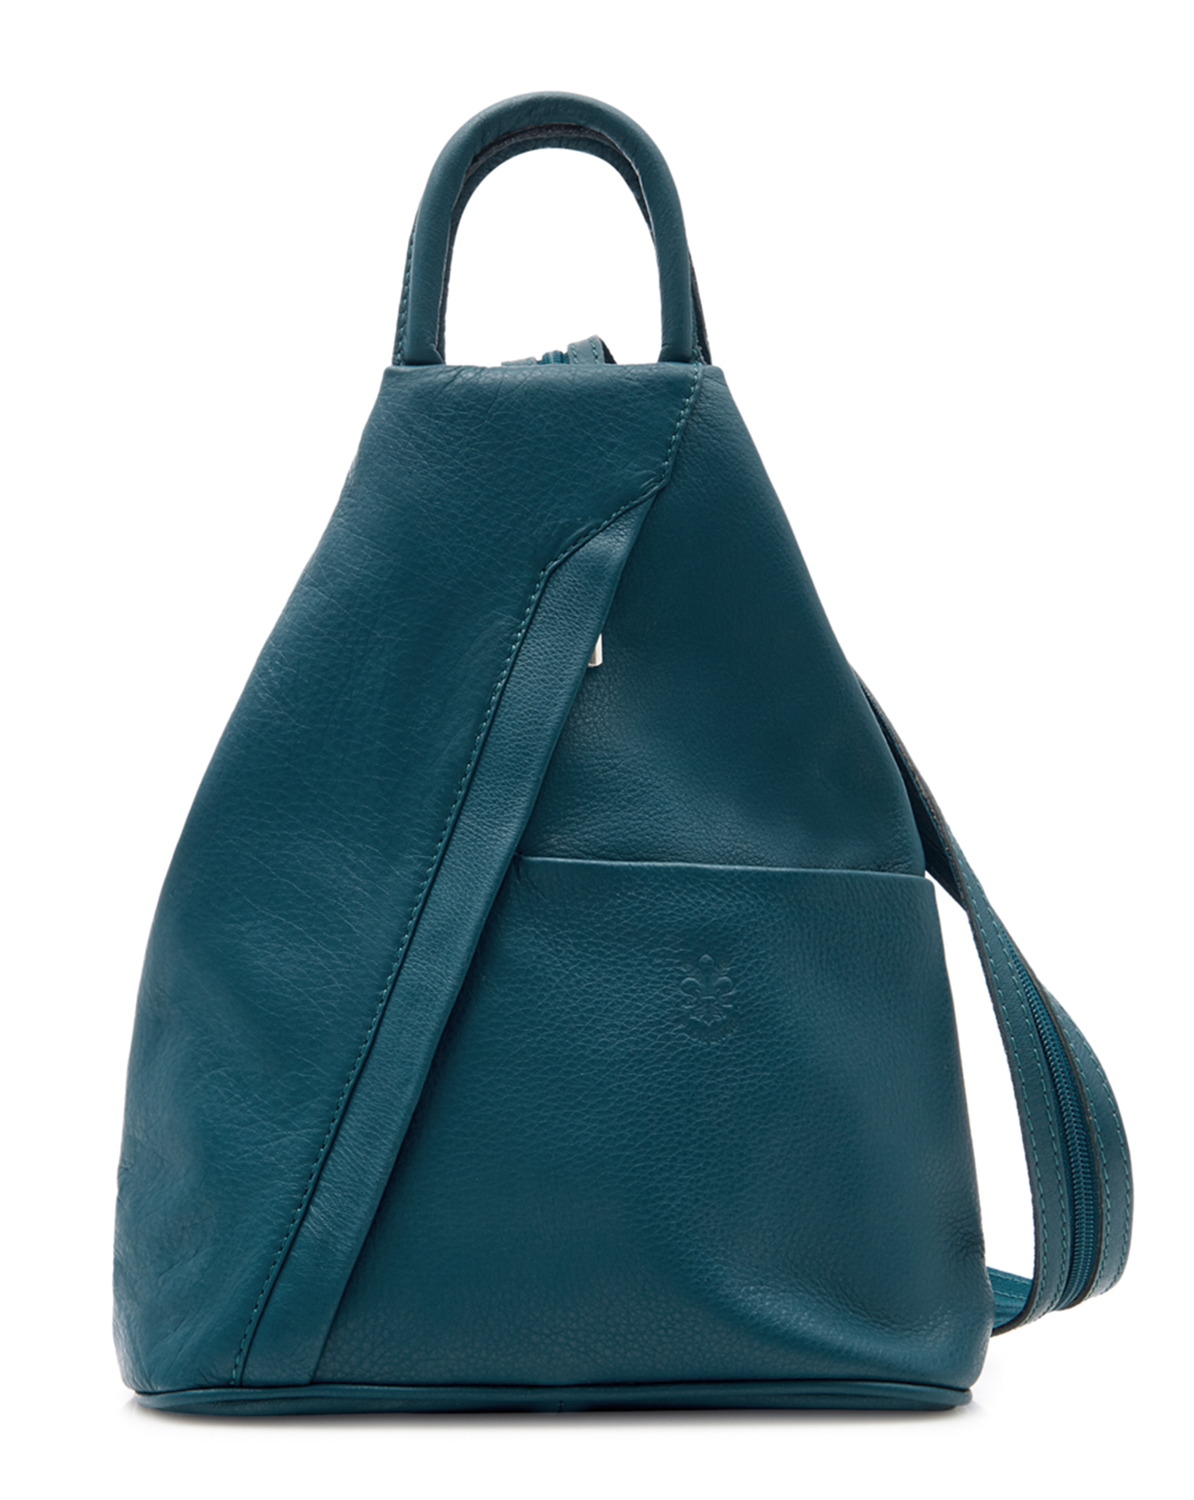 Teal Soft Leather Backpack